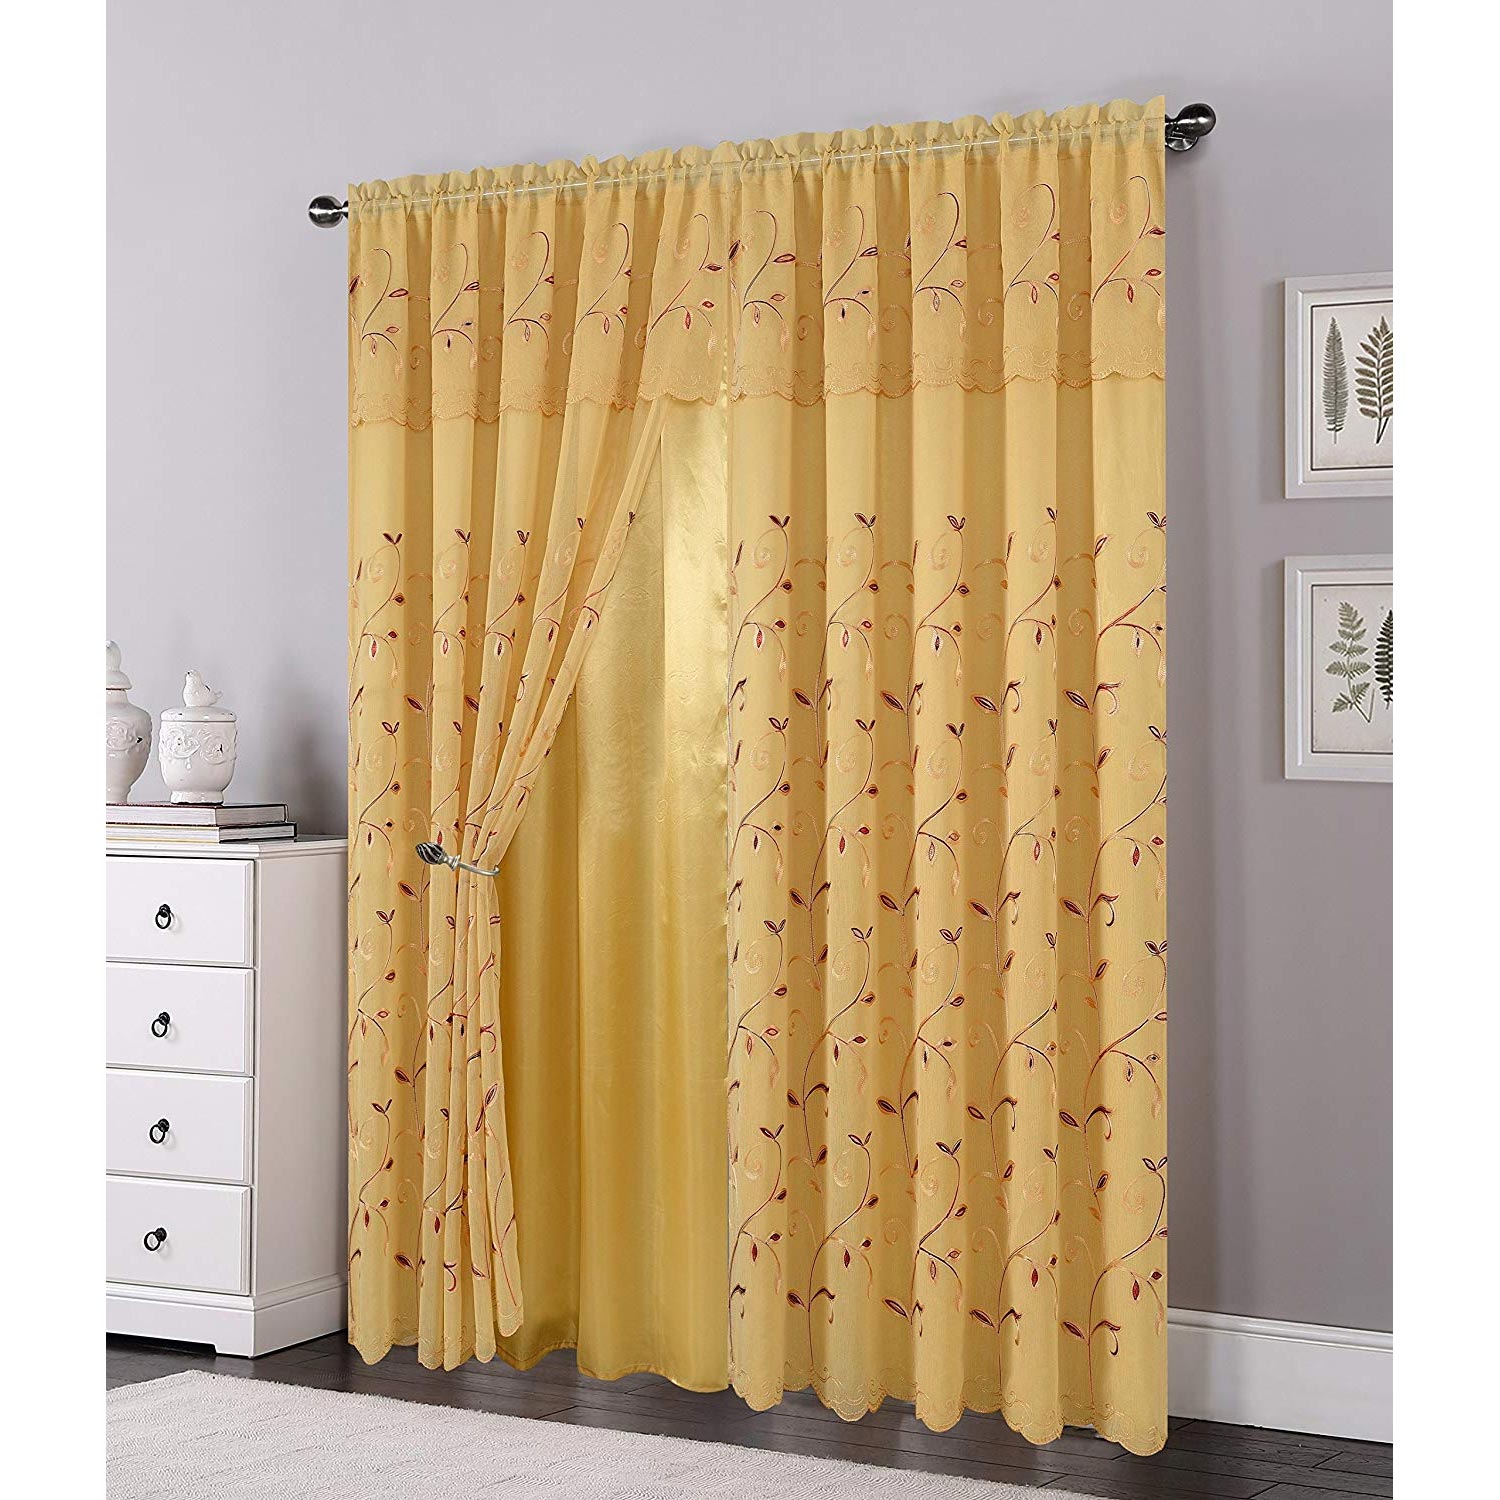 Luxury Curtain/Window Panel Set with Attached Valance and Backing 54" X 84 inch